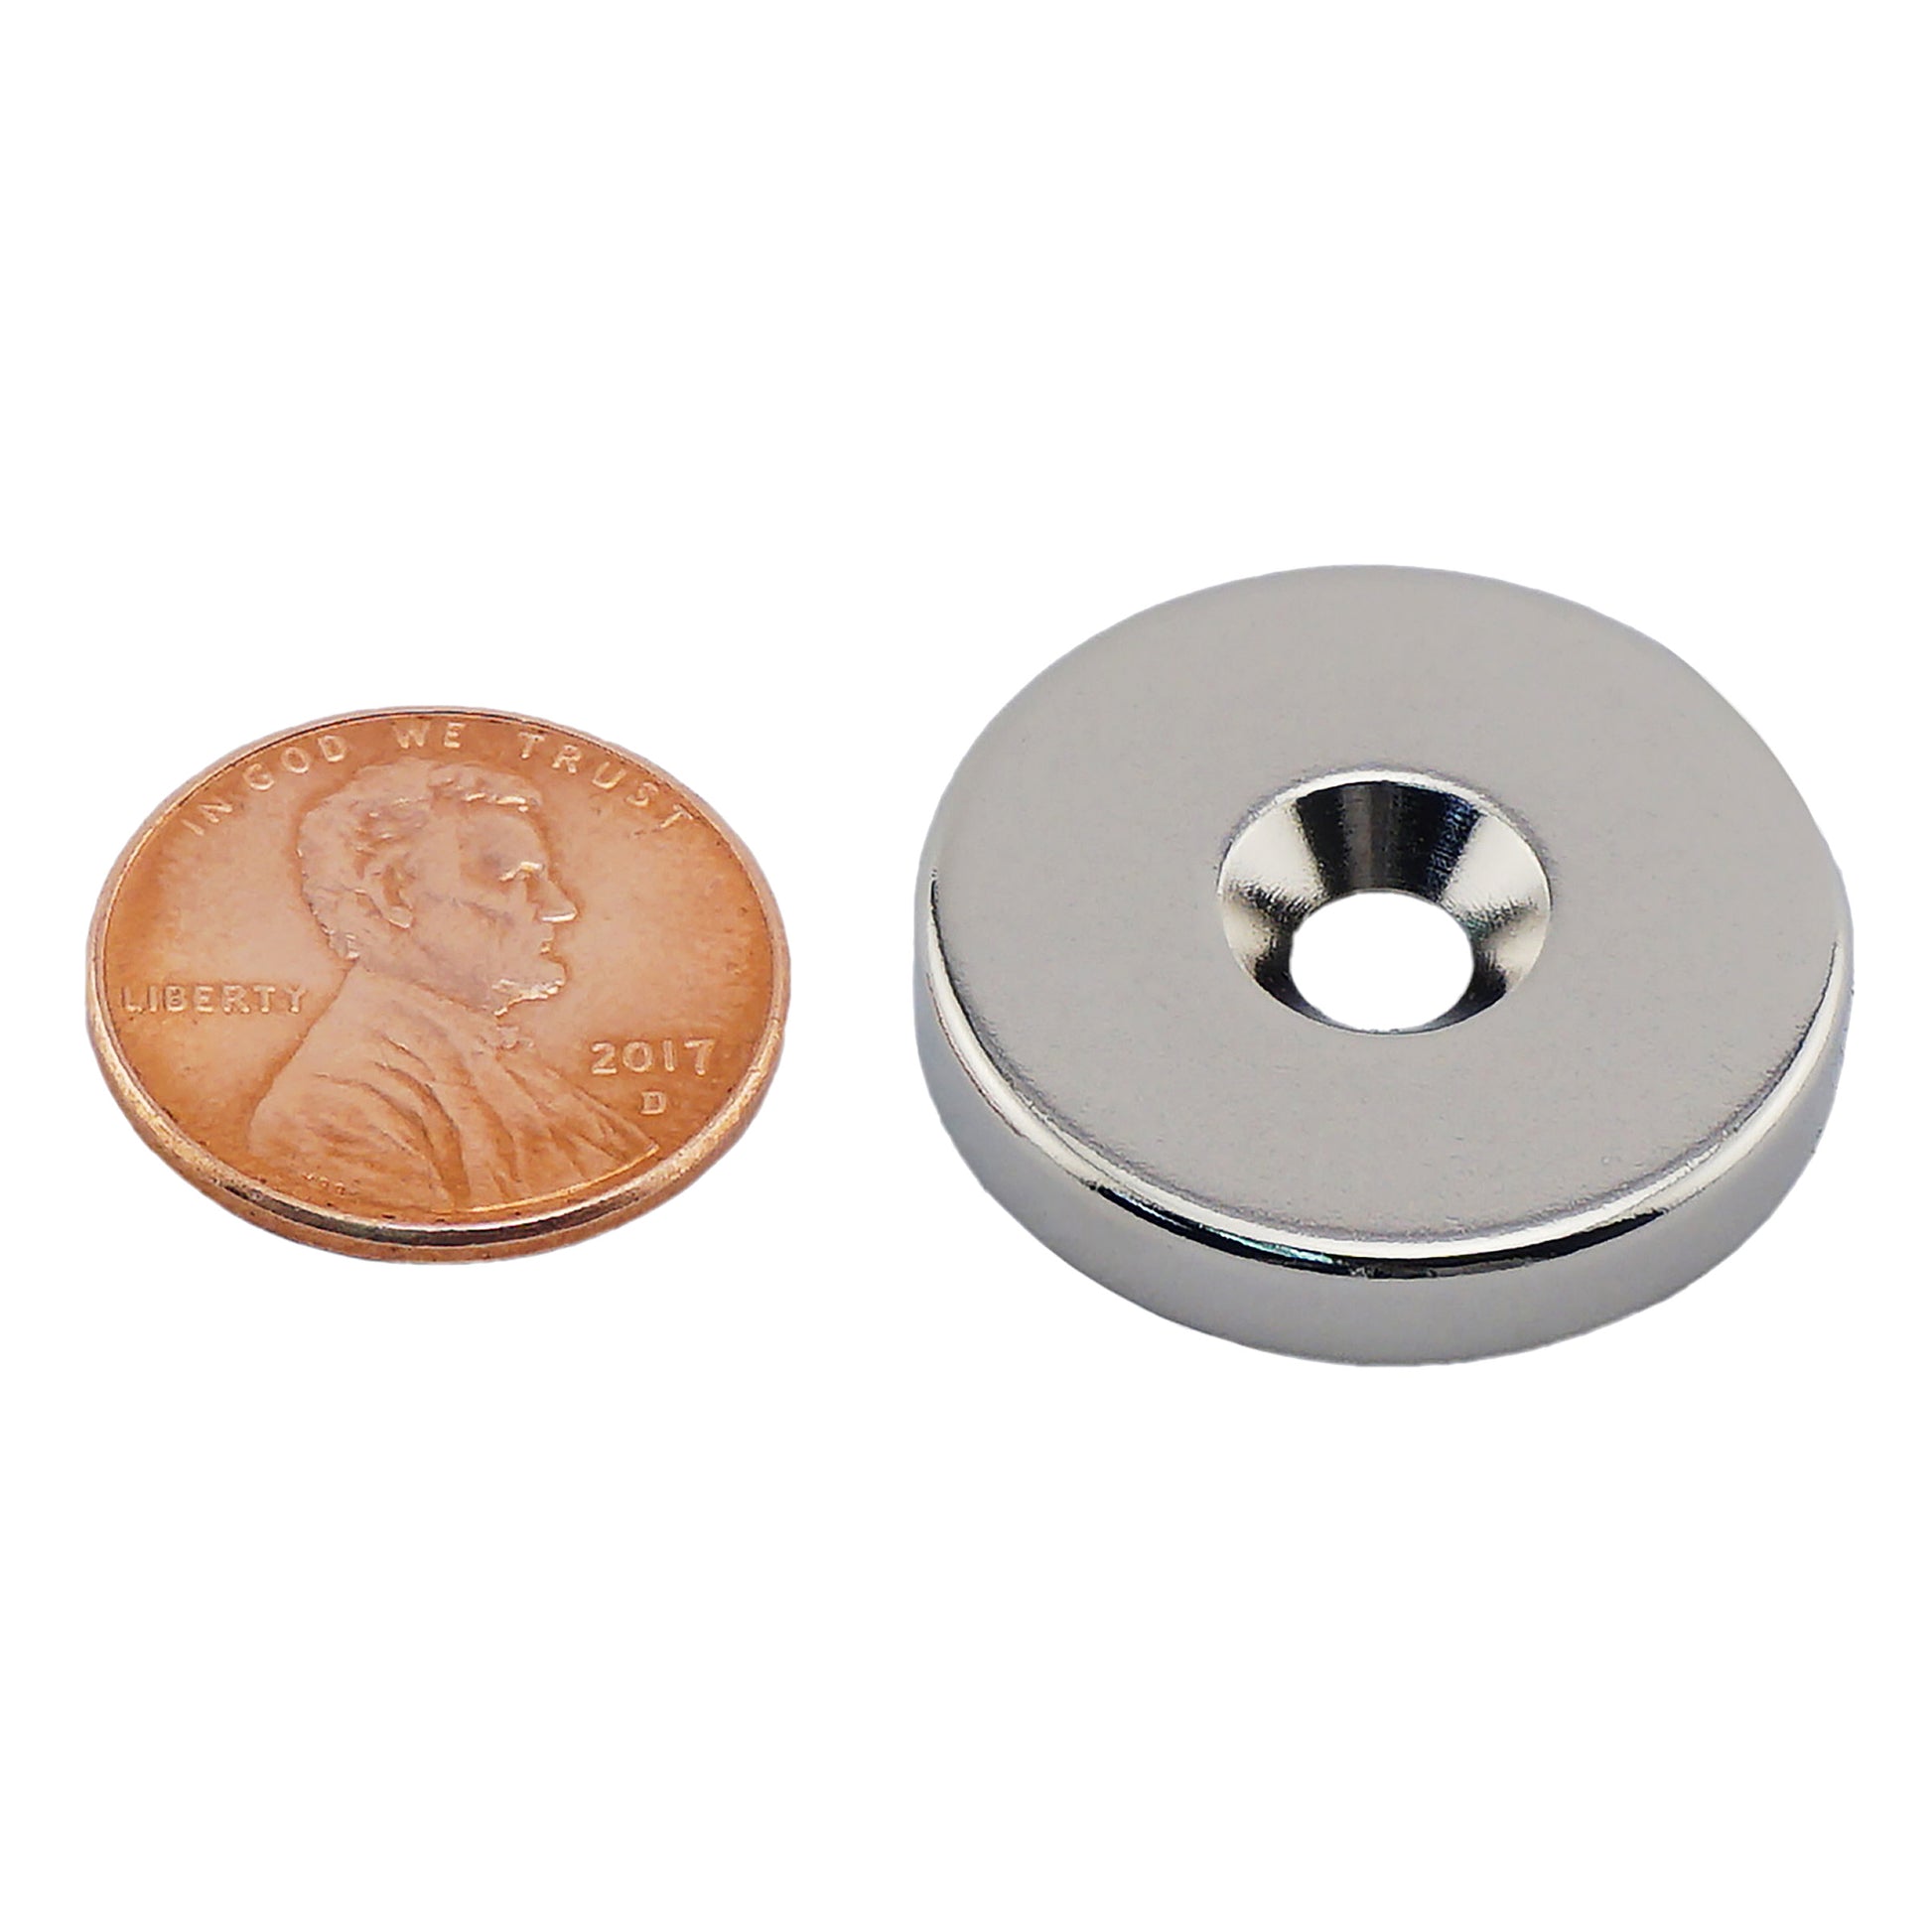 Load image into Gallery viewer, NR010020NCTS Neodymium Countersunk Ring Magnet - Compared to Penny for Size Reference